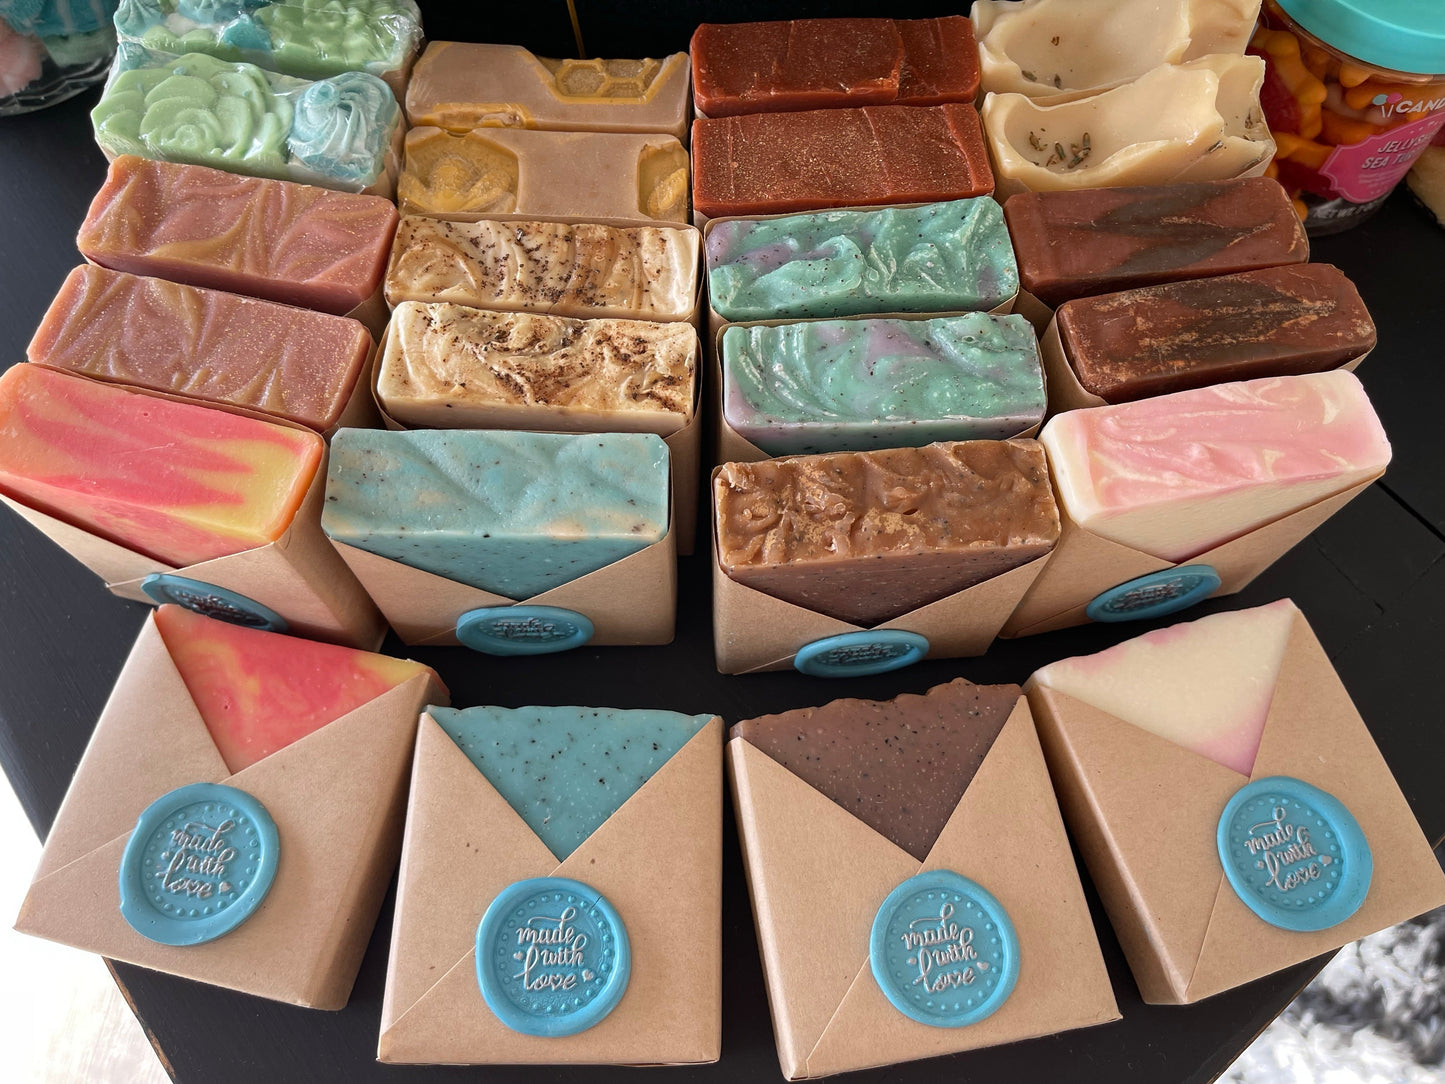 Hand poured bars of soap by Second Street Soap choose your scent